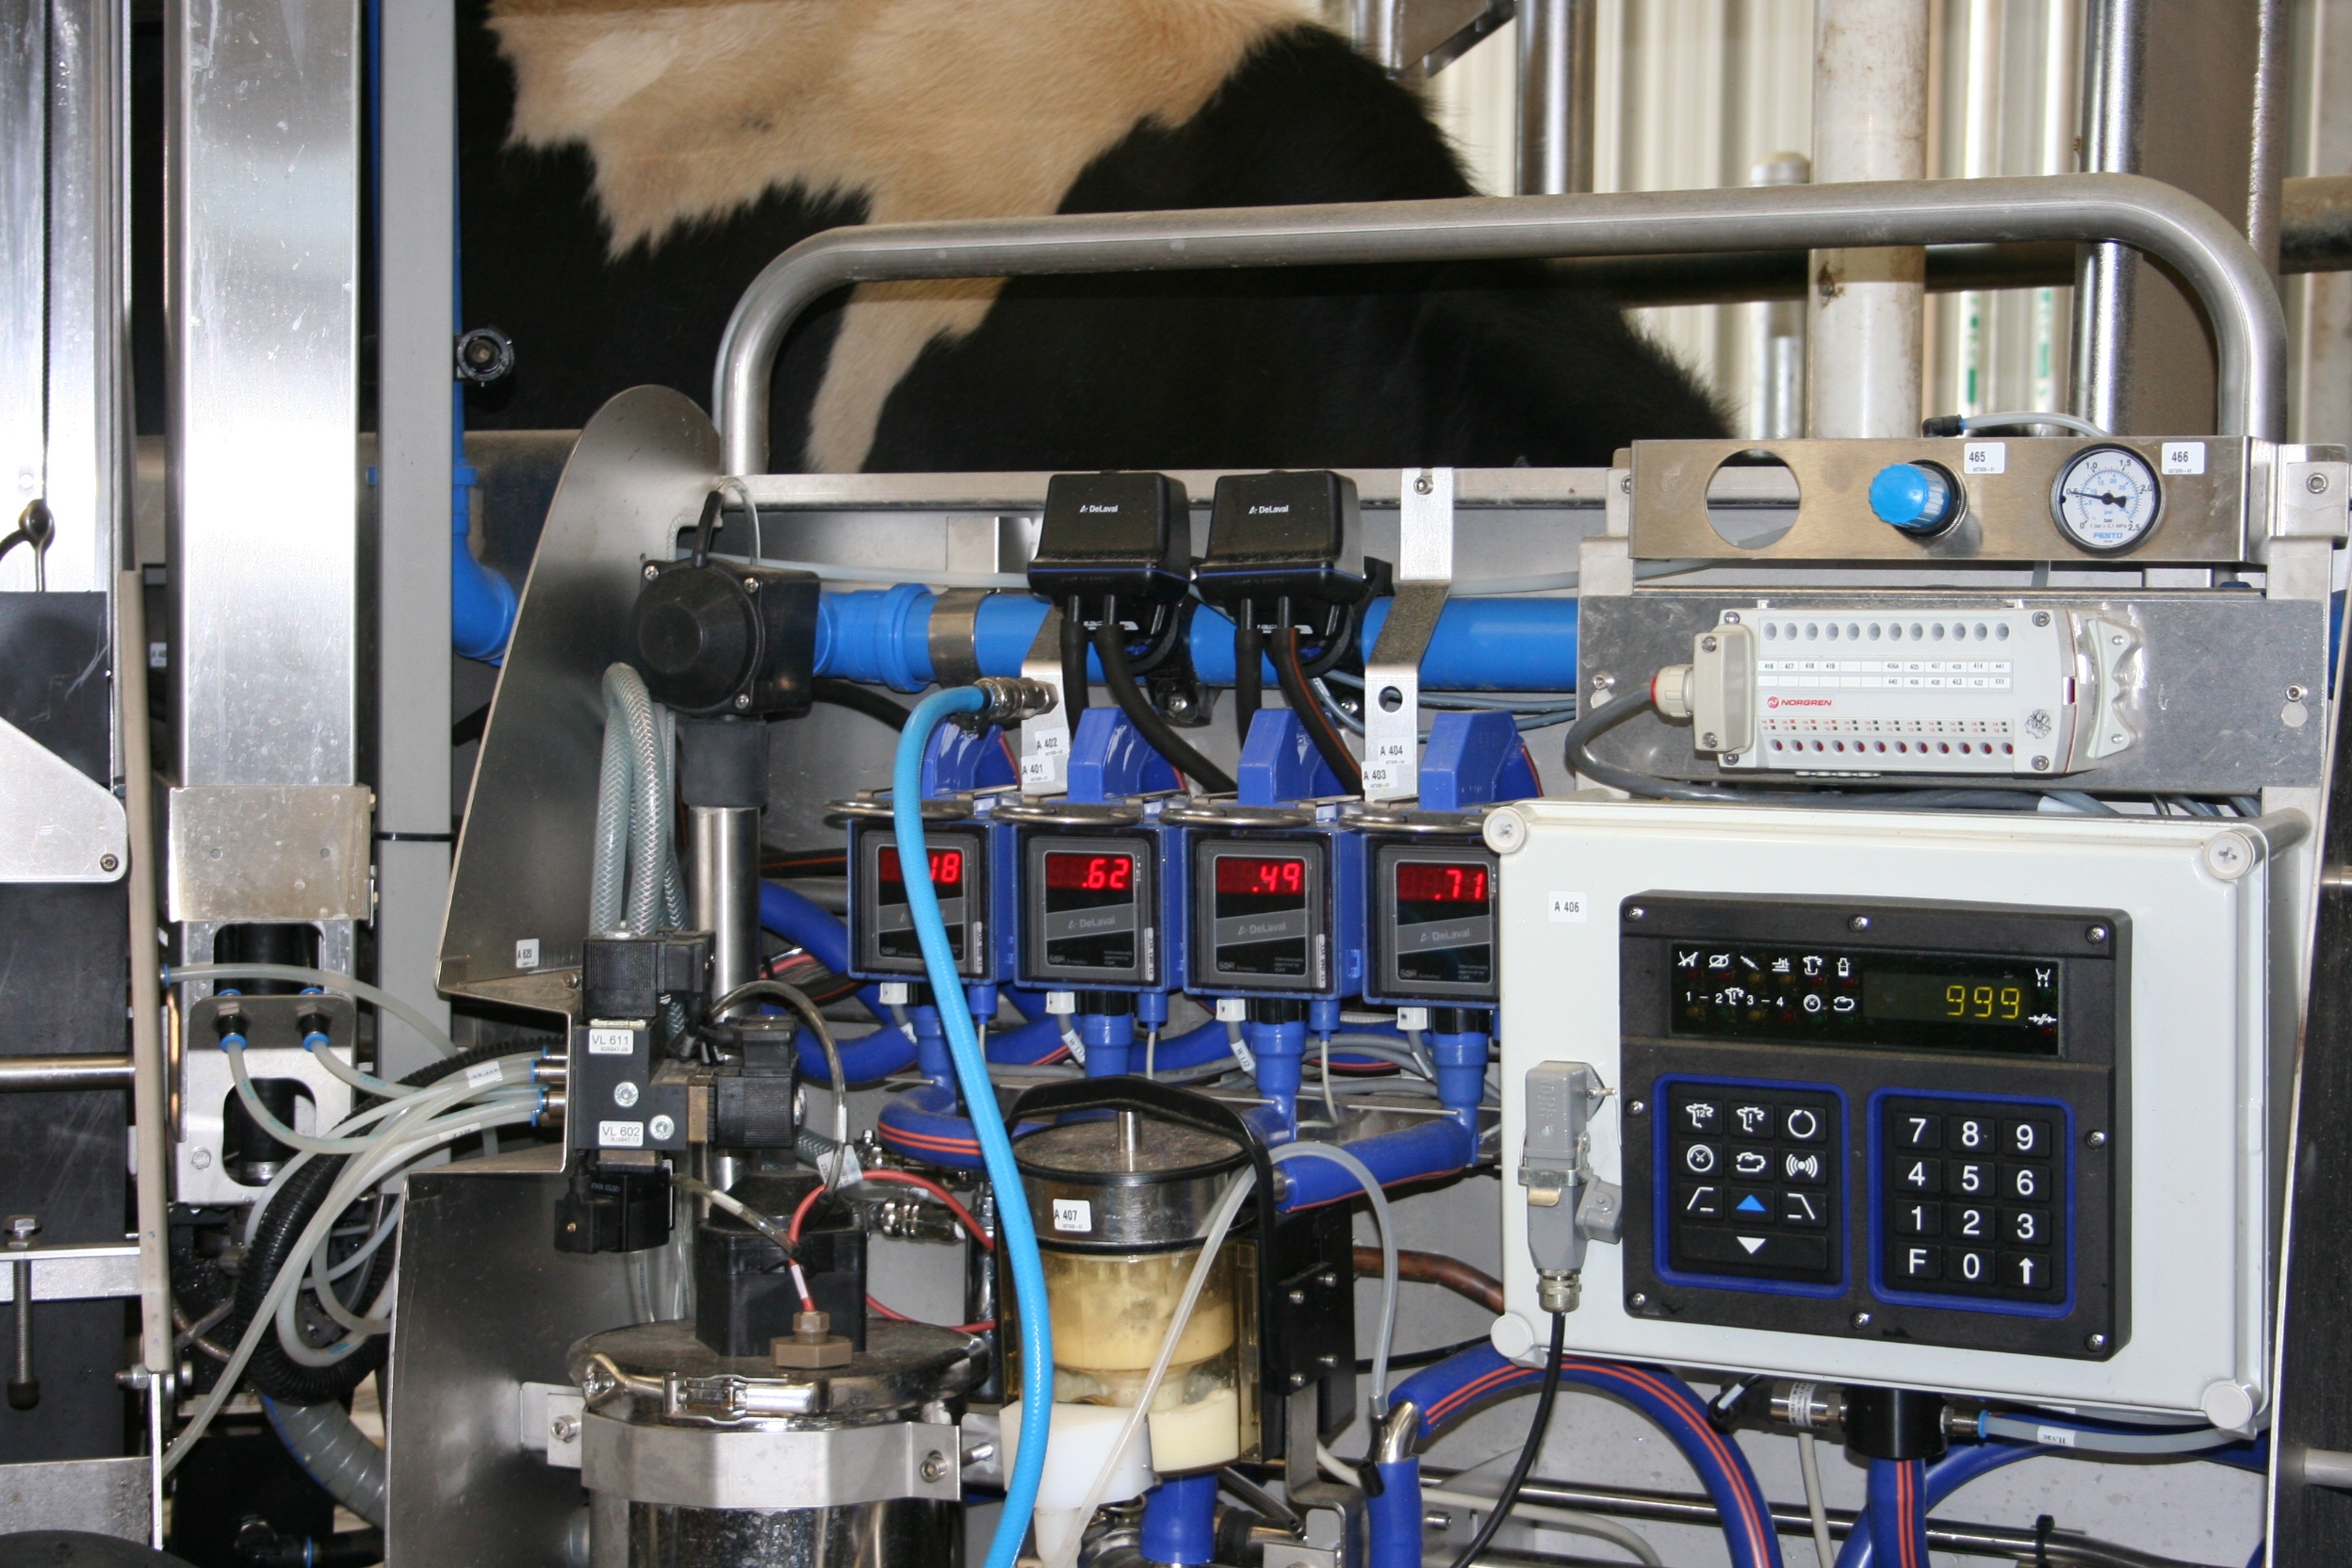 Technology in a robotic dairy